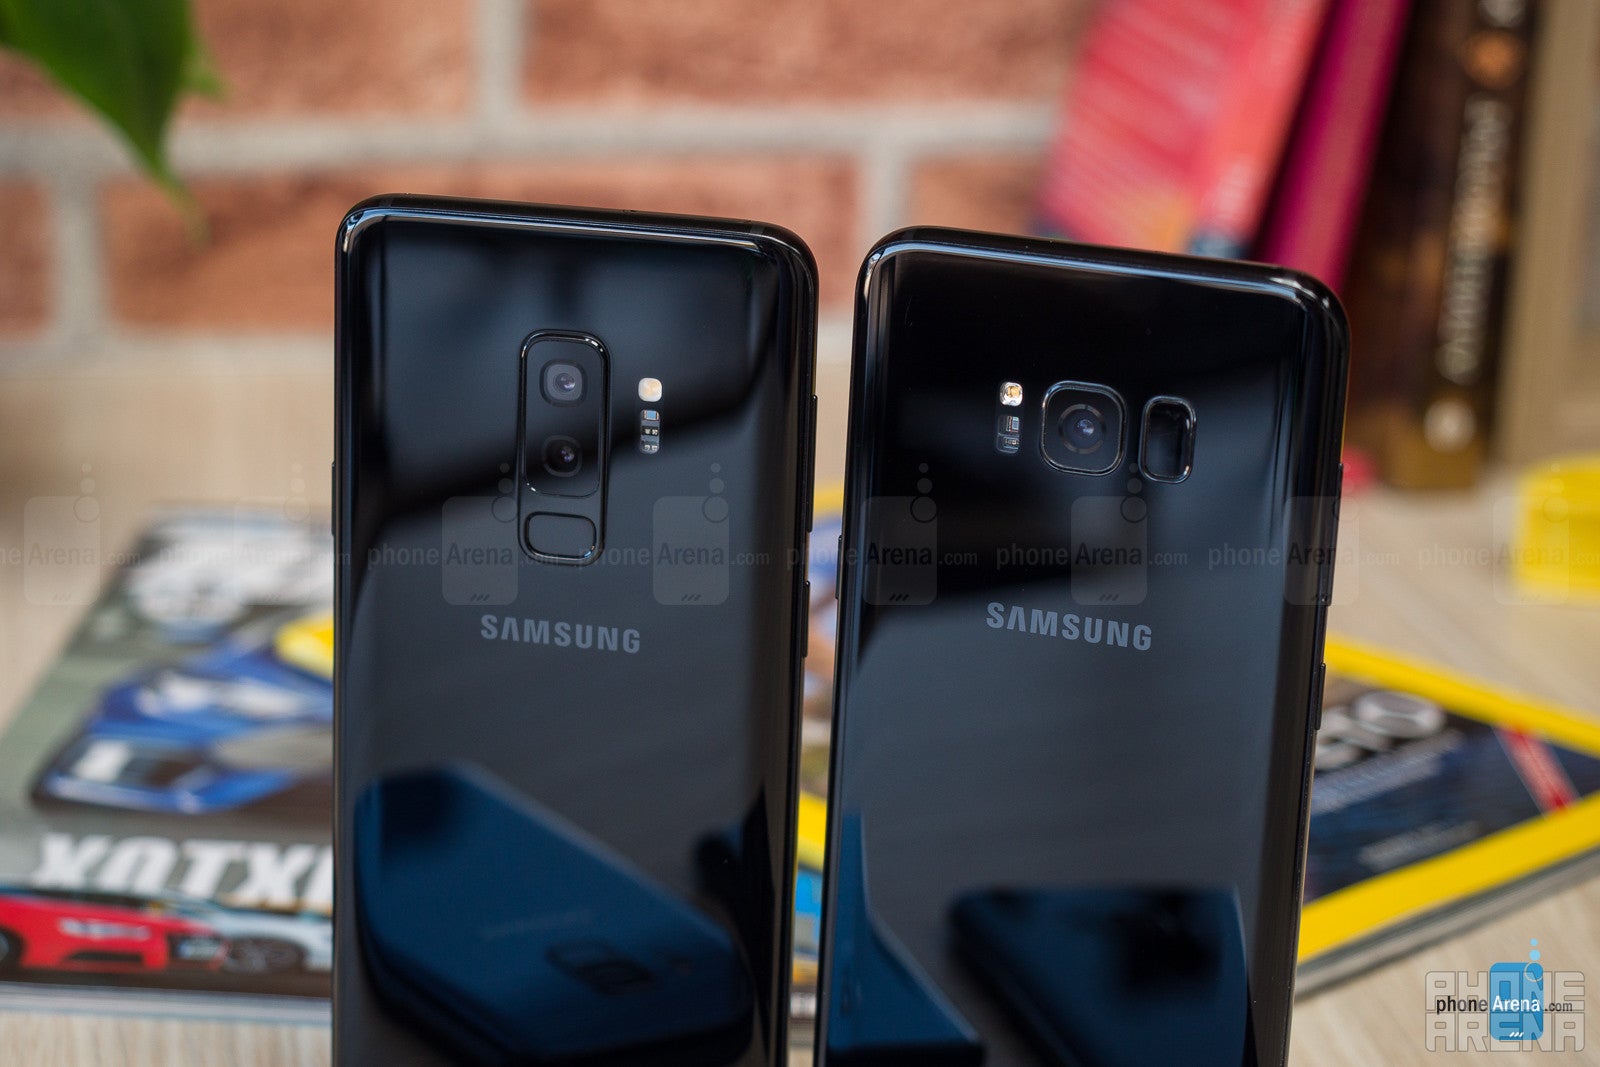 Samsung Galaxy S9 and S9+ vs Galaxy S8 and S8+